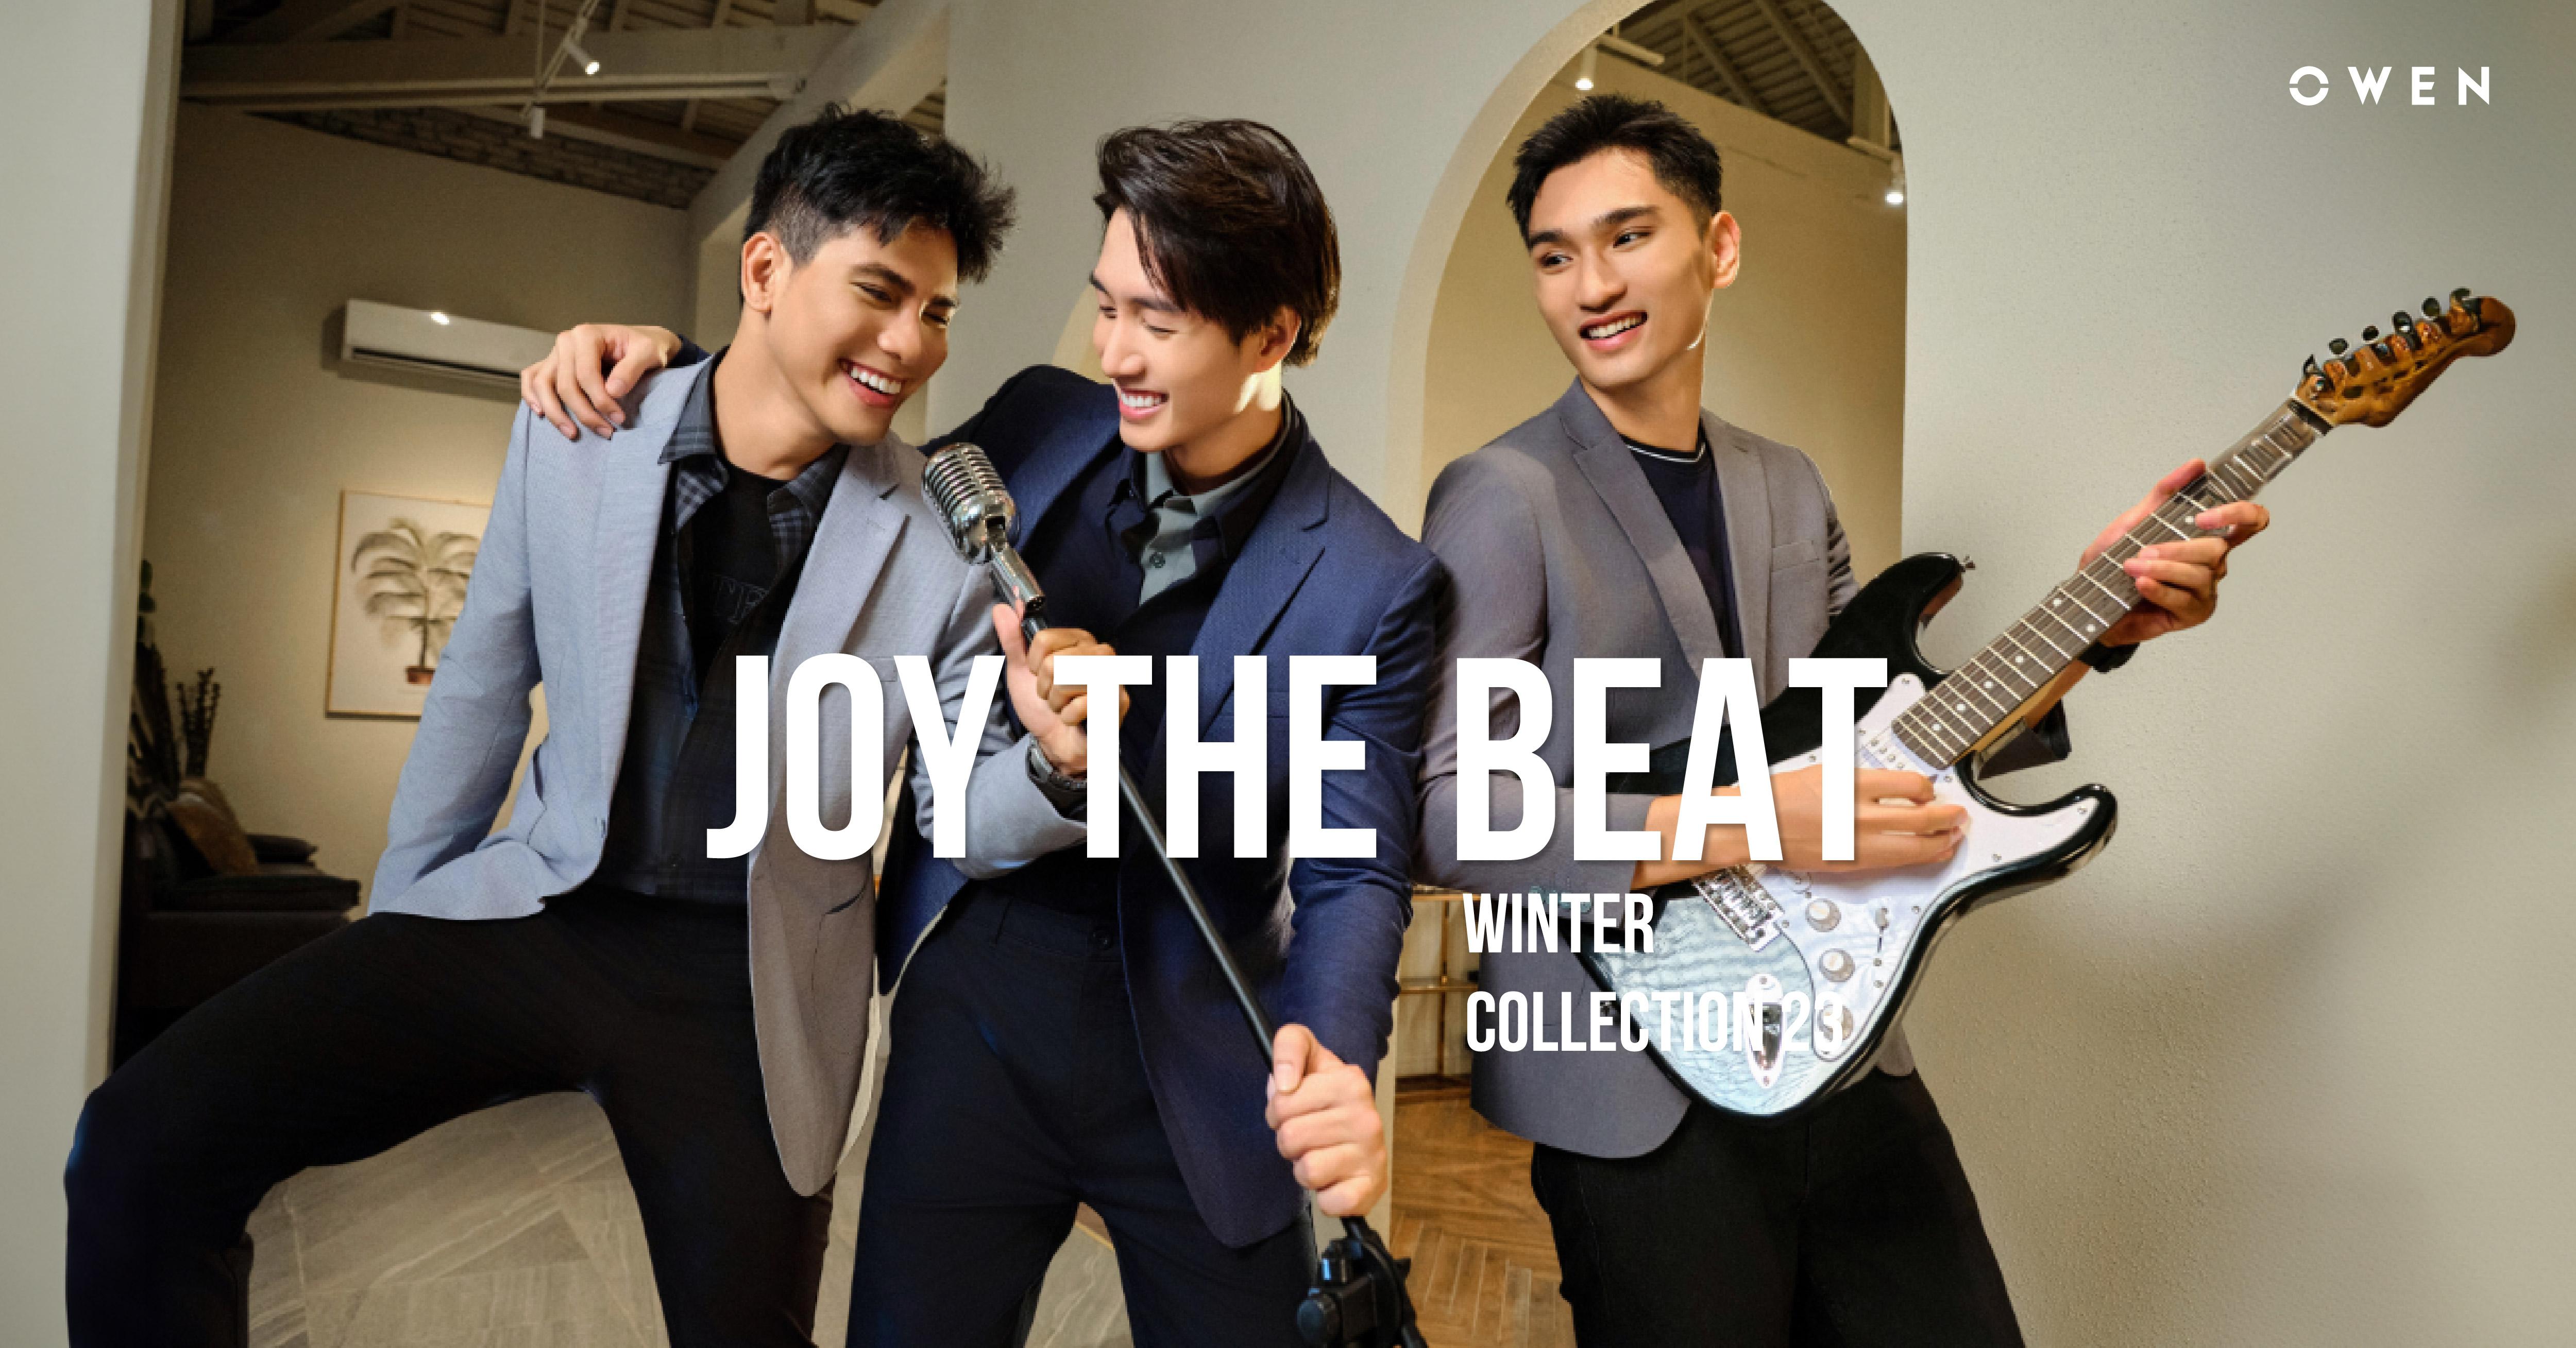 WINTER COLLECTION - JOY THE BEAT